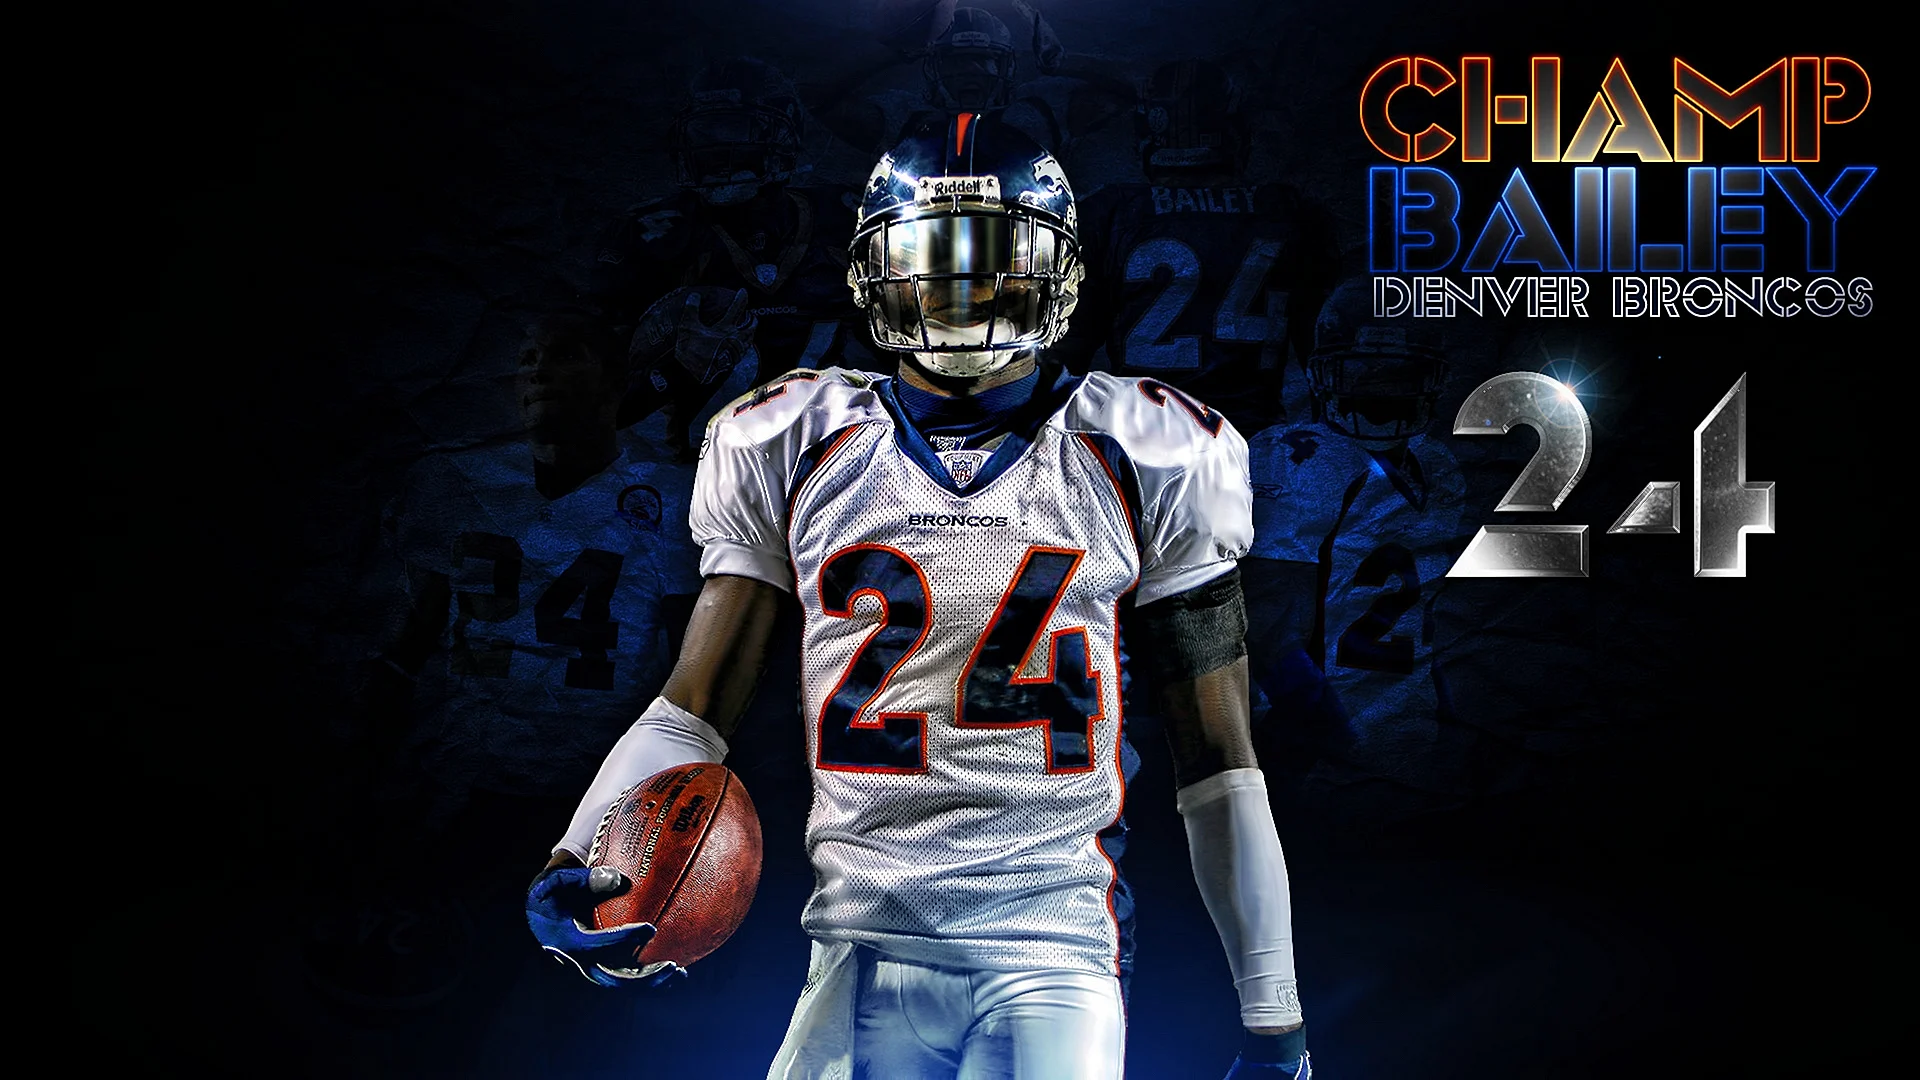 Ultimate Player Football 2021 background Wallpaper